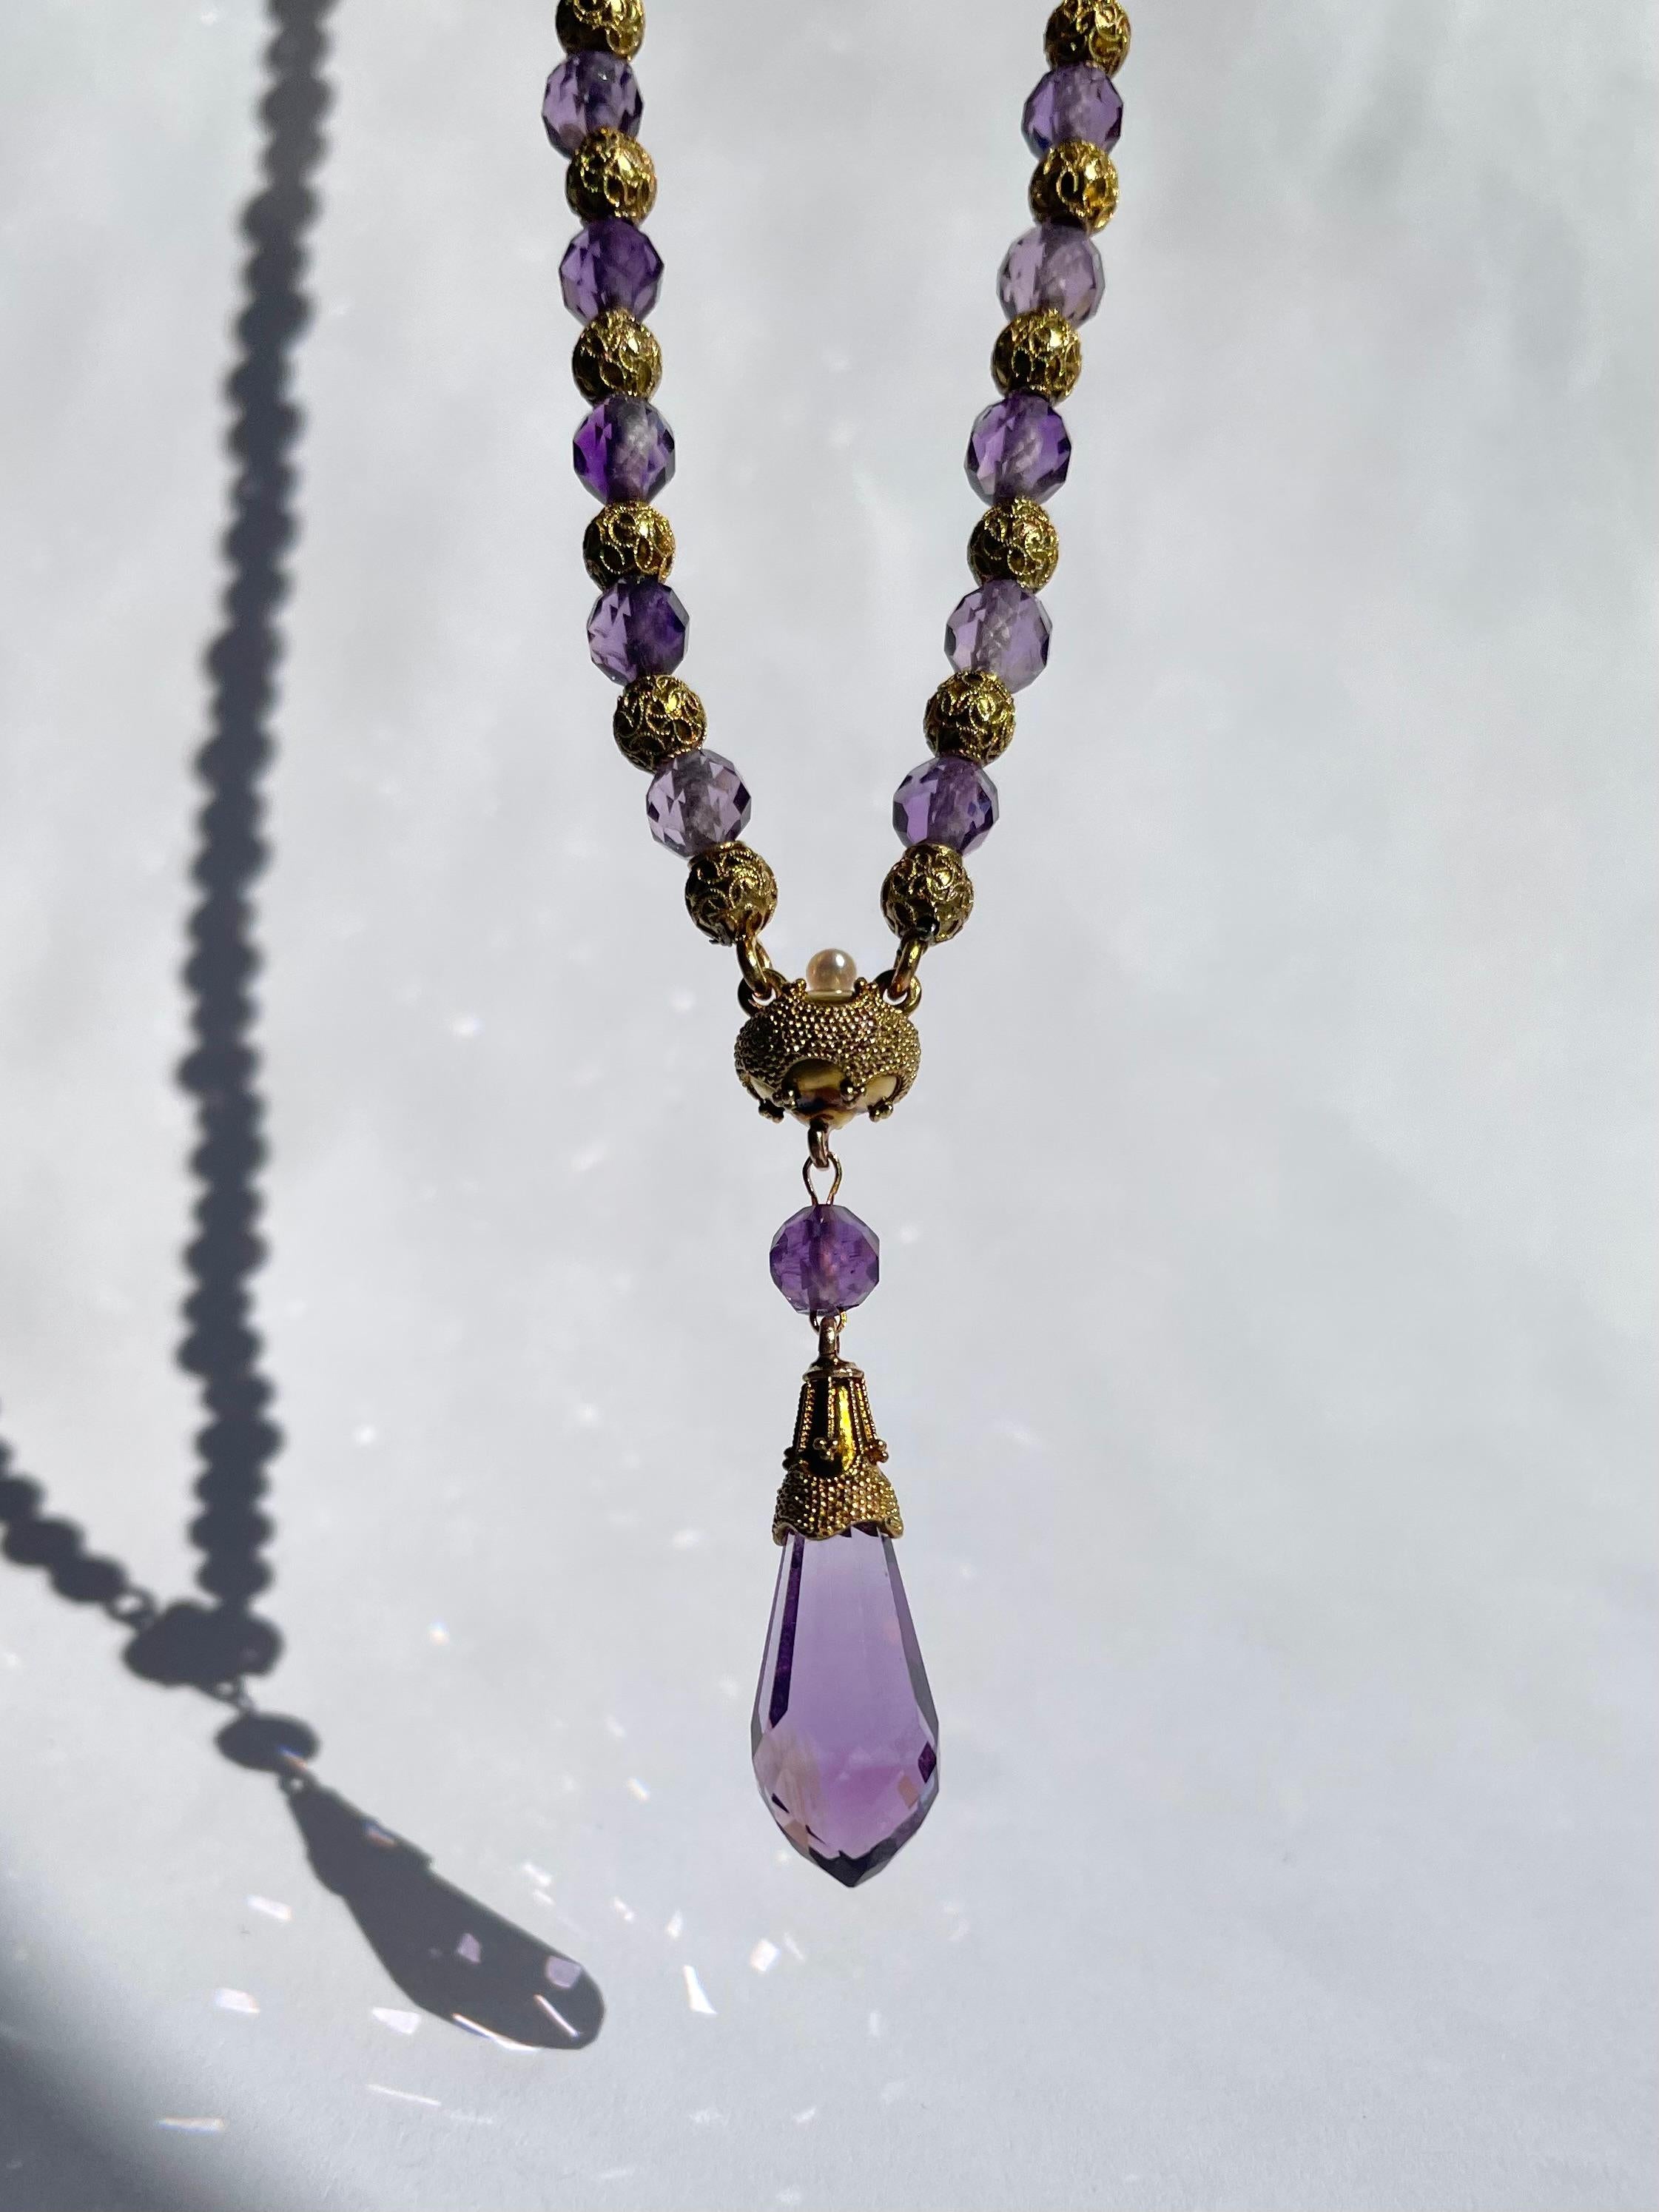 Victorian Faceted Amethyst & Cannetille Gold Filigree Drop Necklace 18 Karat Gol In Good Condition For Sale In Boston, MA